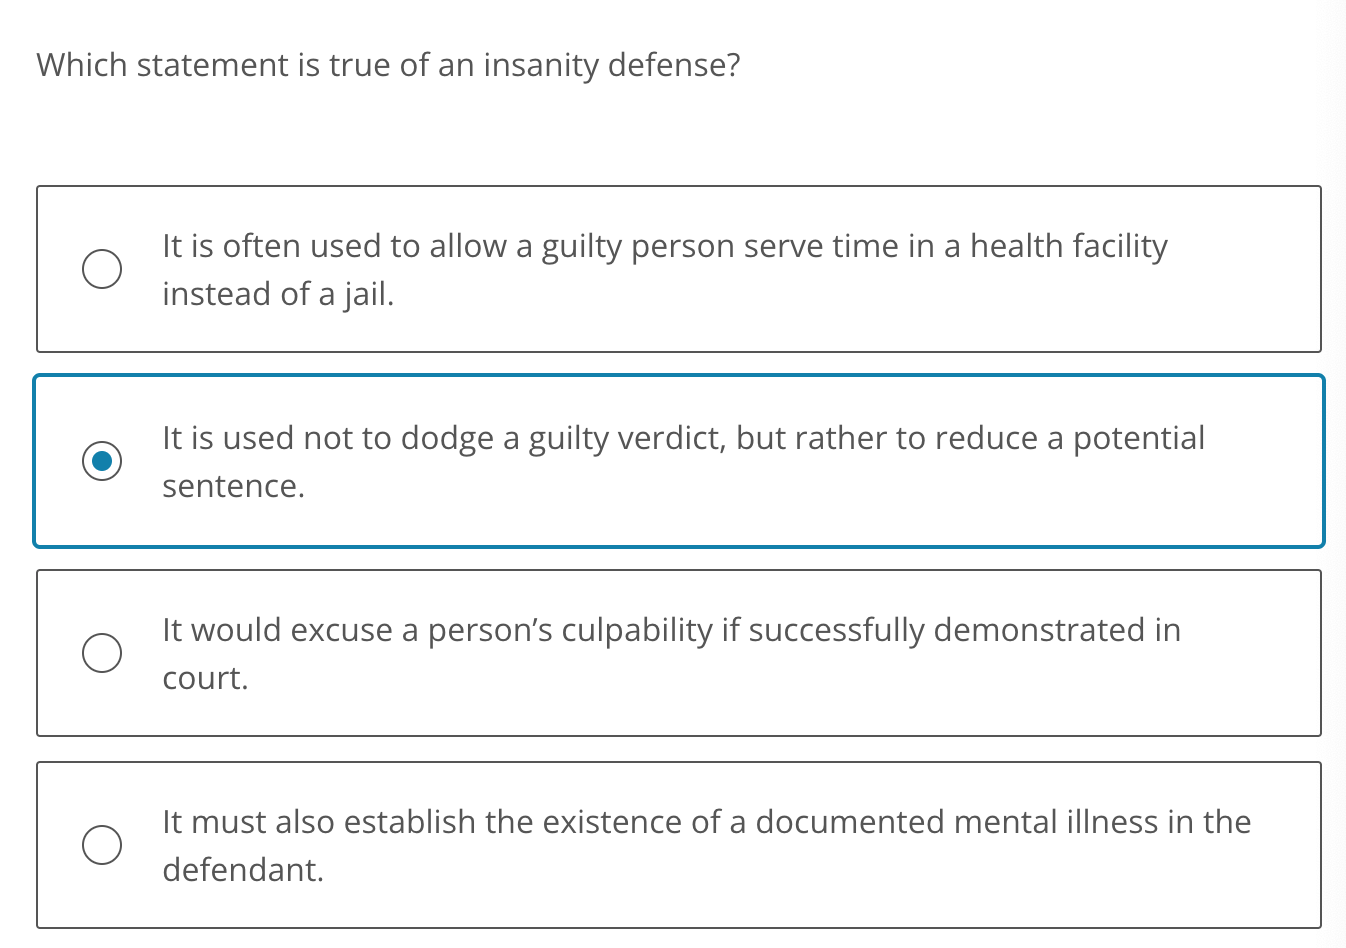 Should You Pay Jail Fees for Time Spent if Not Guilty?